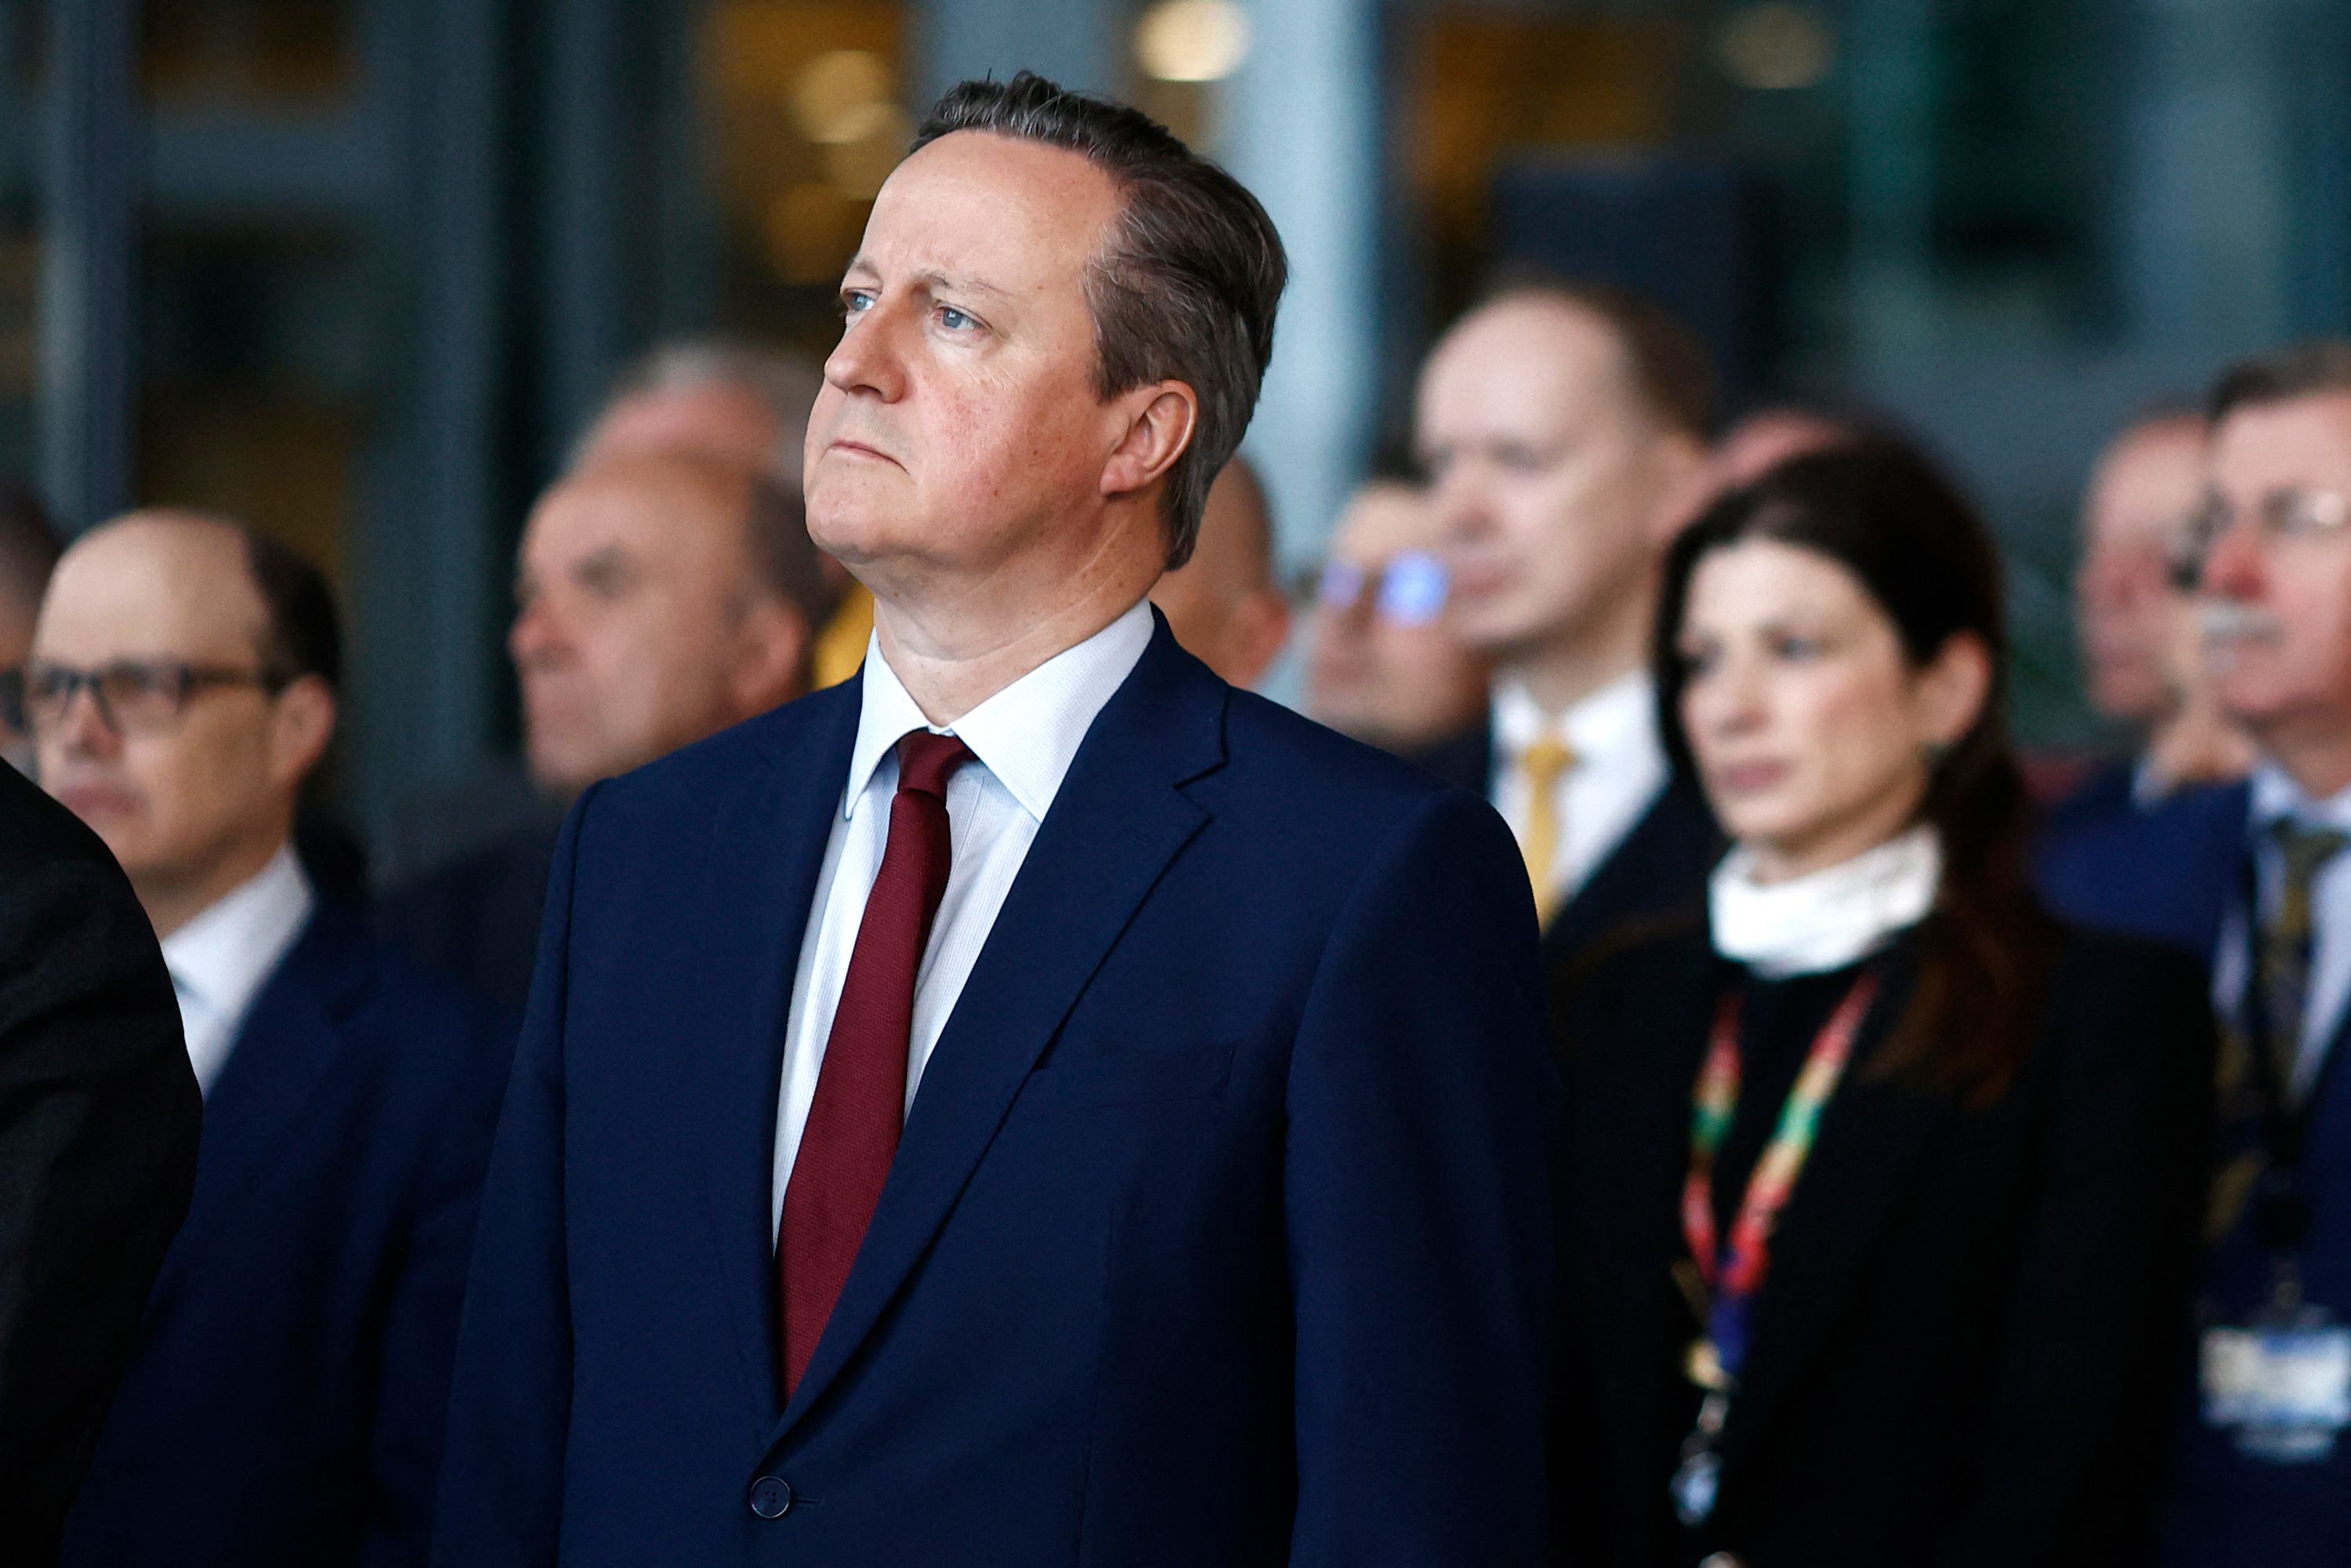 Britain's Secretary for Foreign Affairs David Cameron listen on during speeches marking the alliance's 75th anniversary at the NATO Headquarters in Brussels on April 4, 2024. The NATO military alliance on April 4, 2024, marks the 75th anniversary of the signing of its founding treaty in Washington.